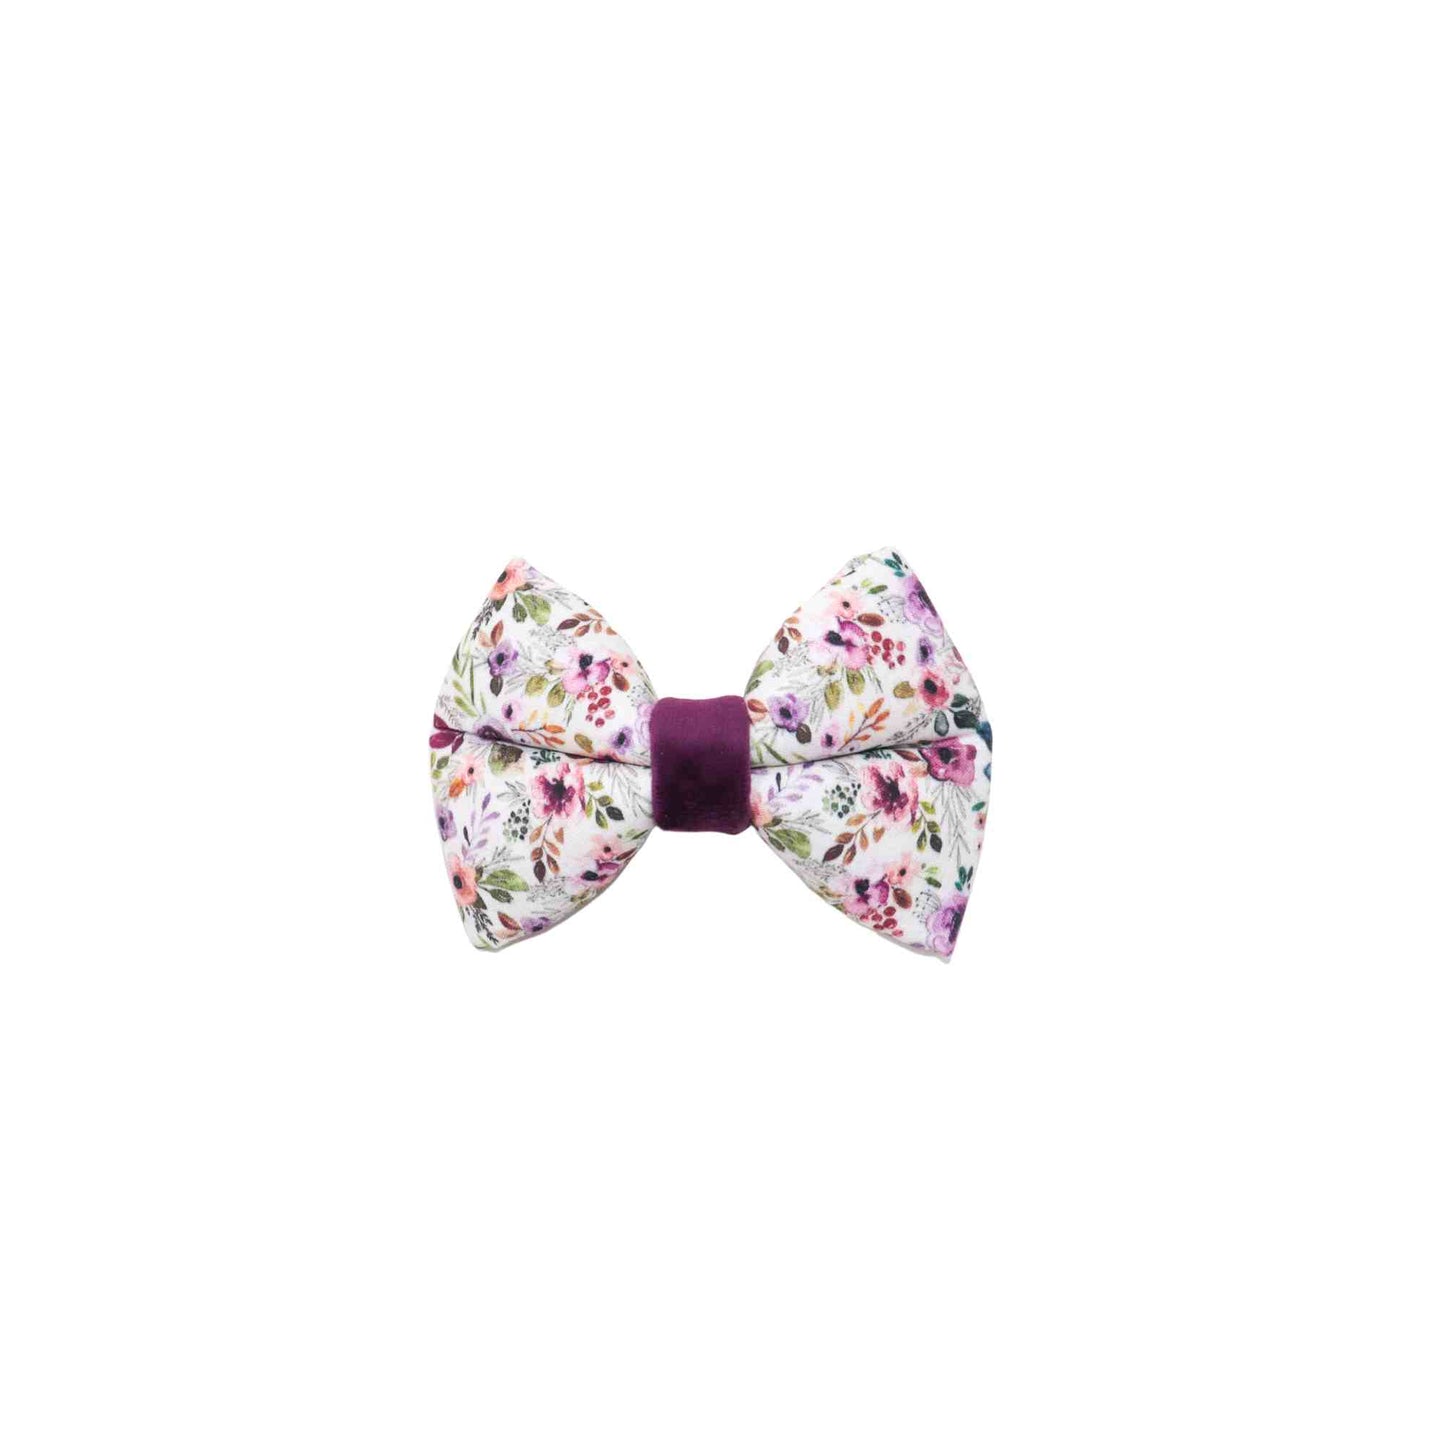 "Mulberry" Puffy Bow Tie